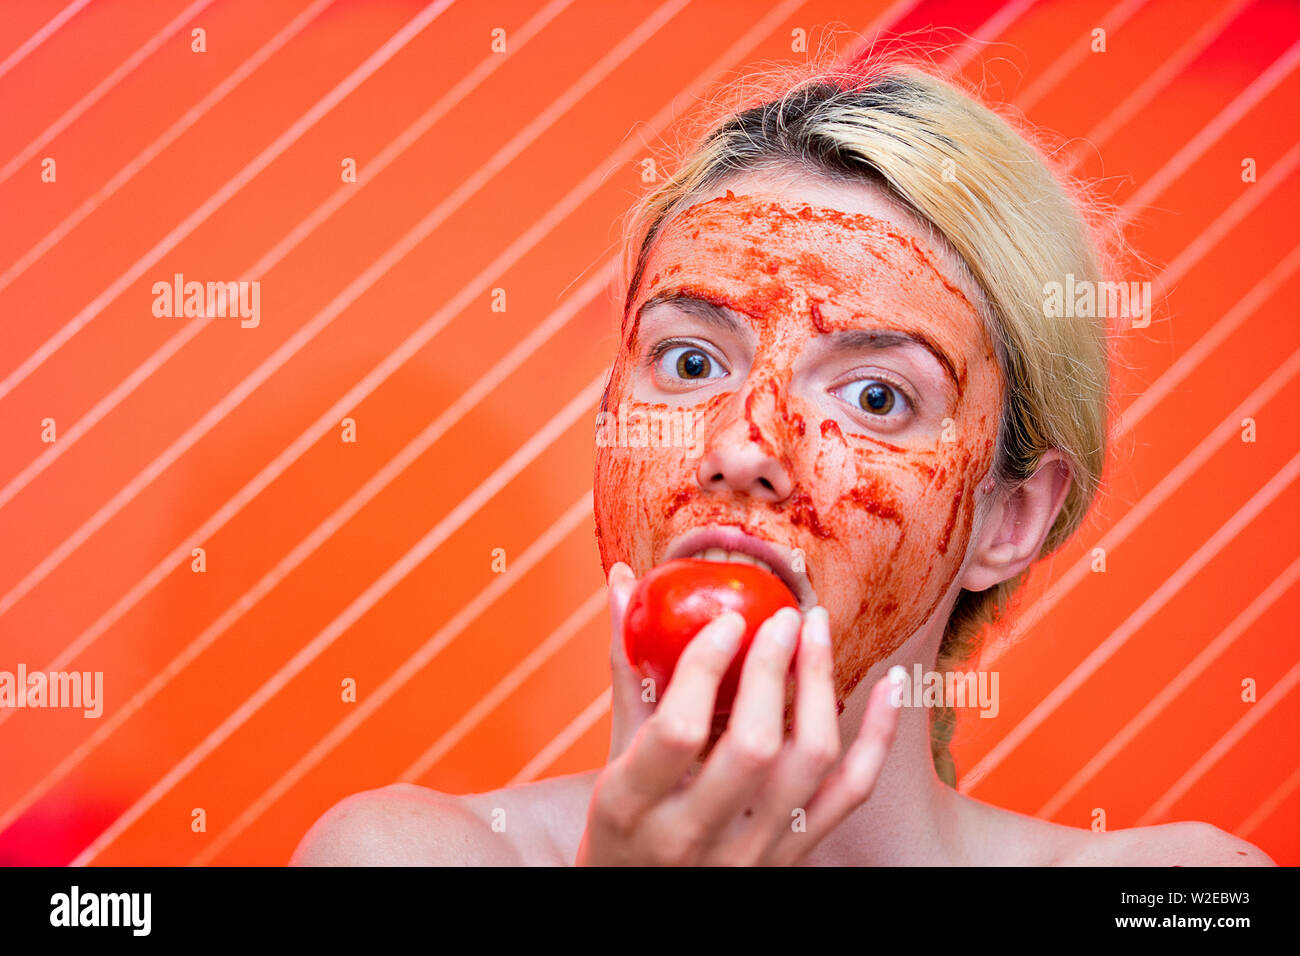 Download Honey Face Mask High Resolution Stock Photography And Images Alamy PSD Mockup Templates